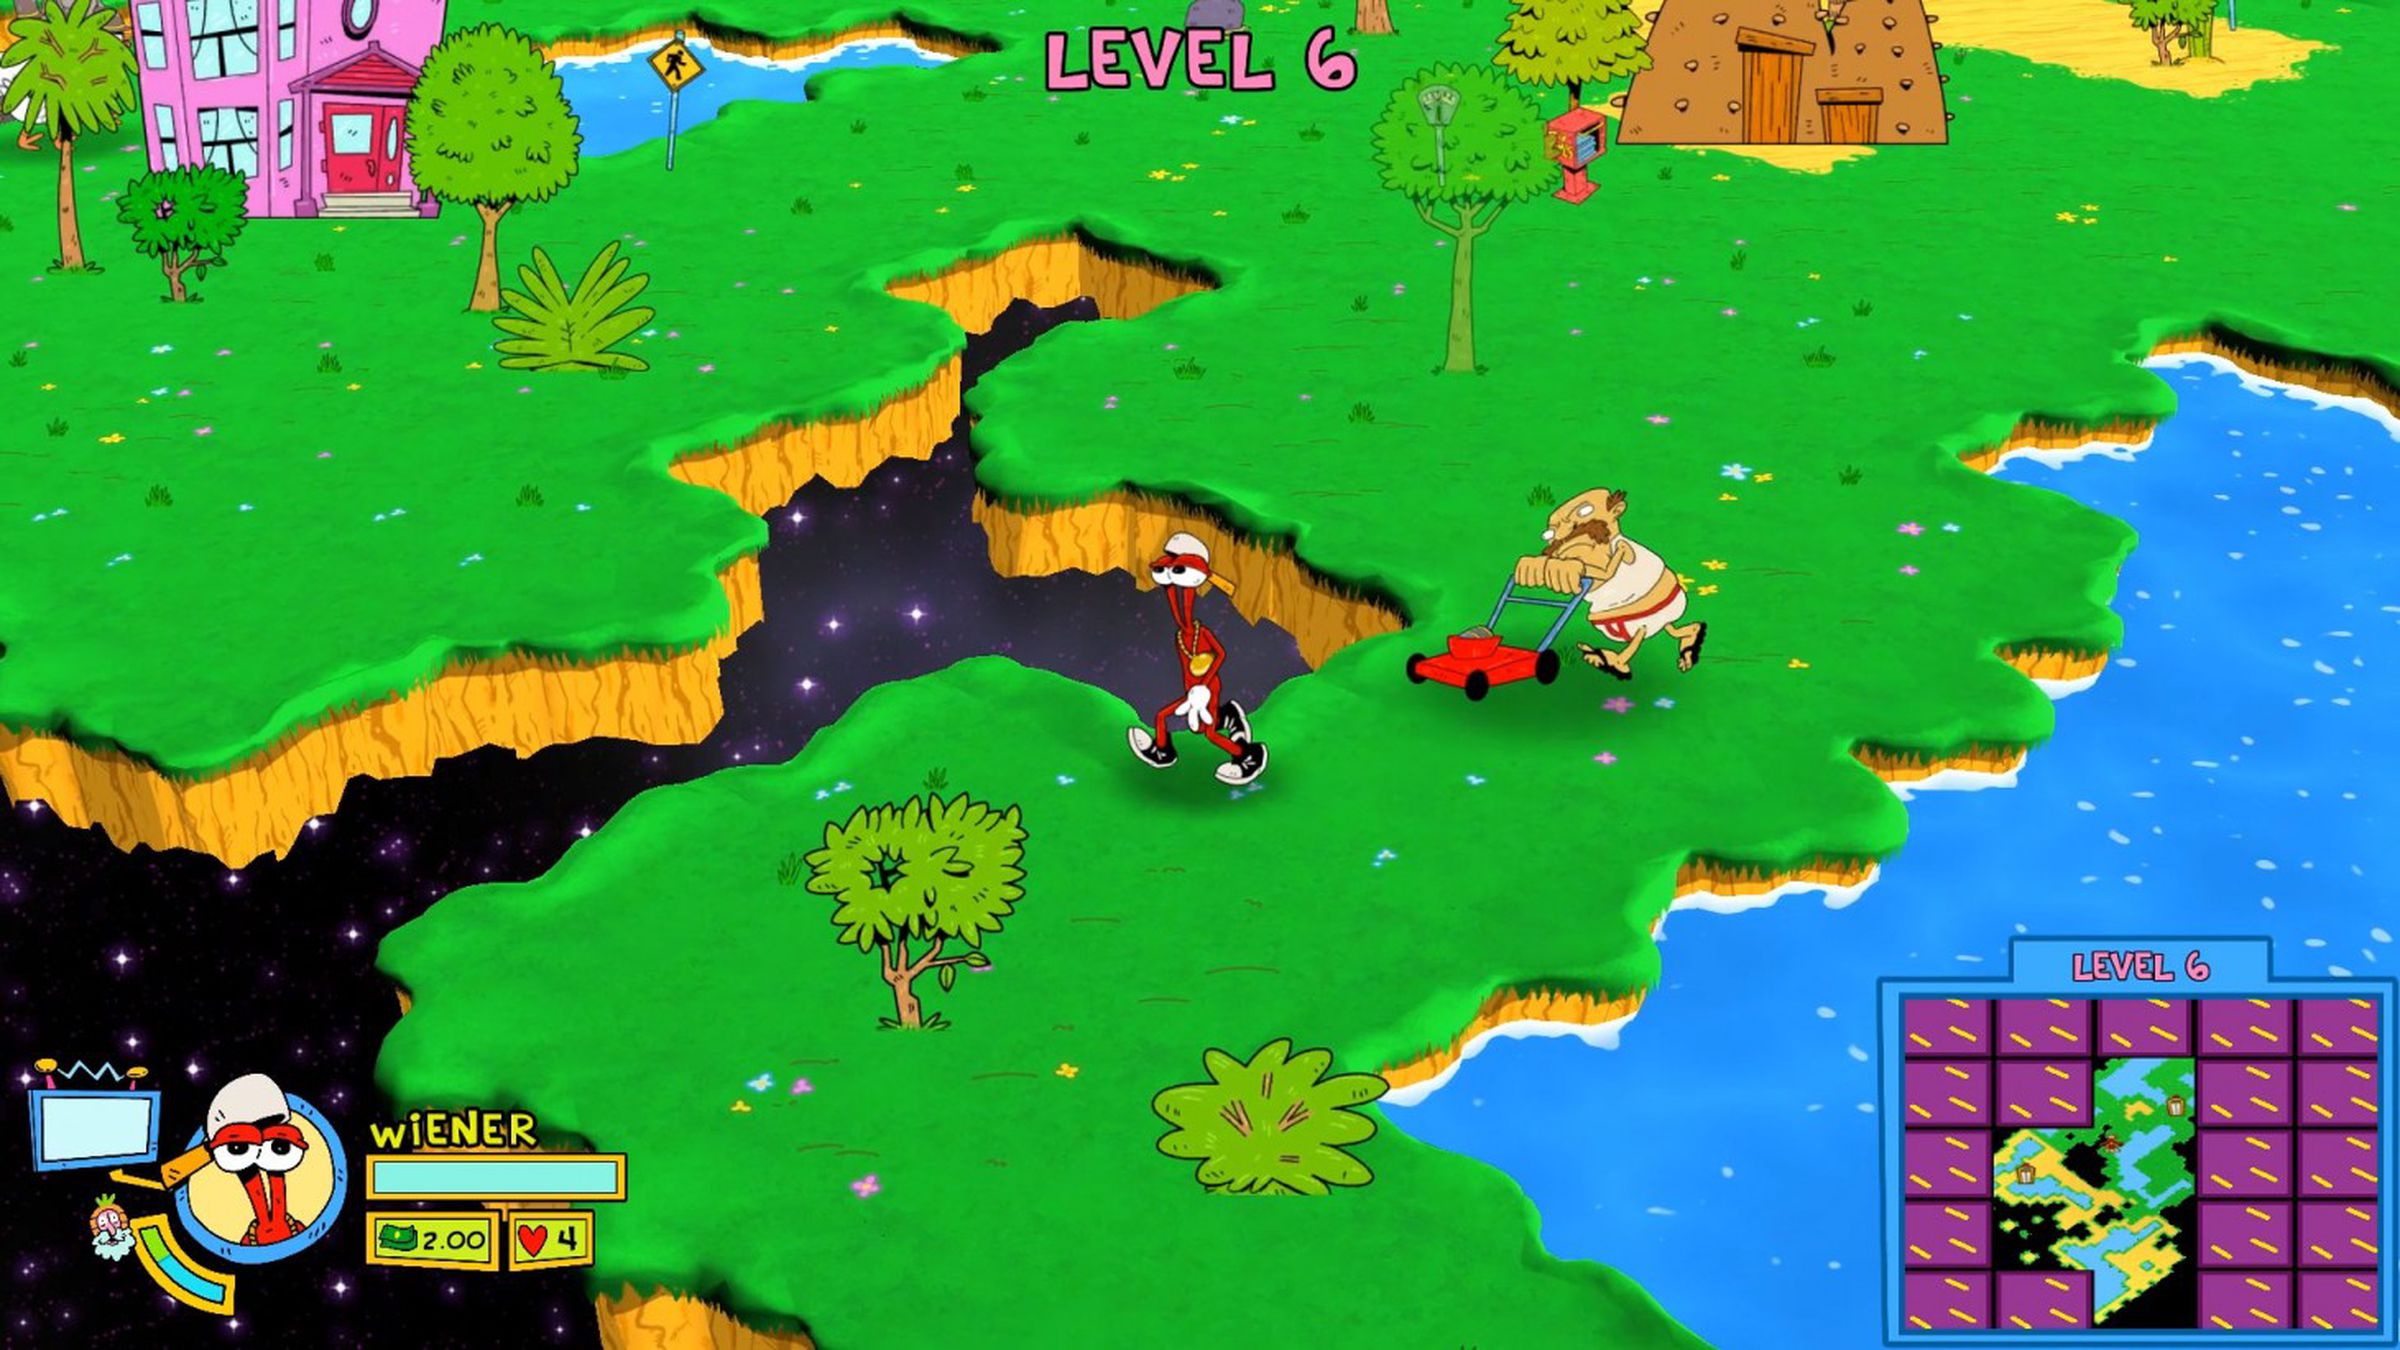 ToeJam & Earl: Back in the Groove is the latest mainline appearance of the extraterrestrial duo.